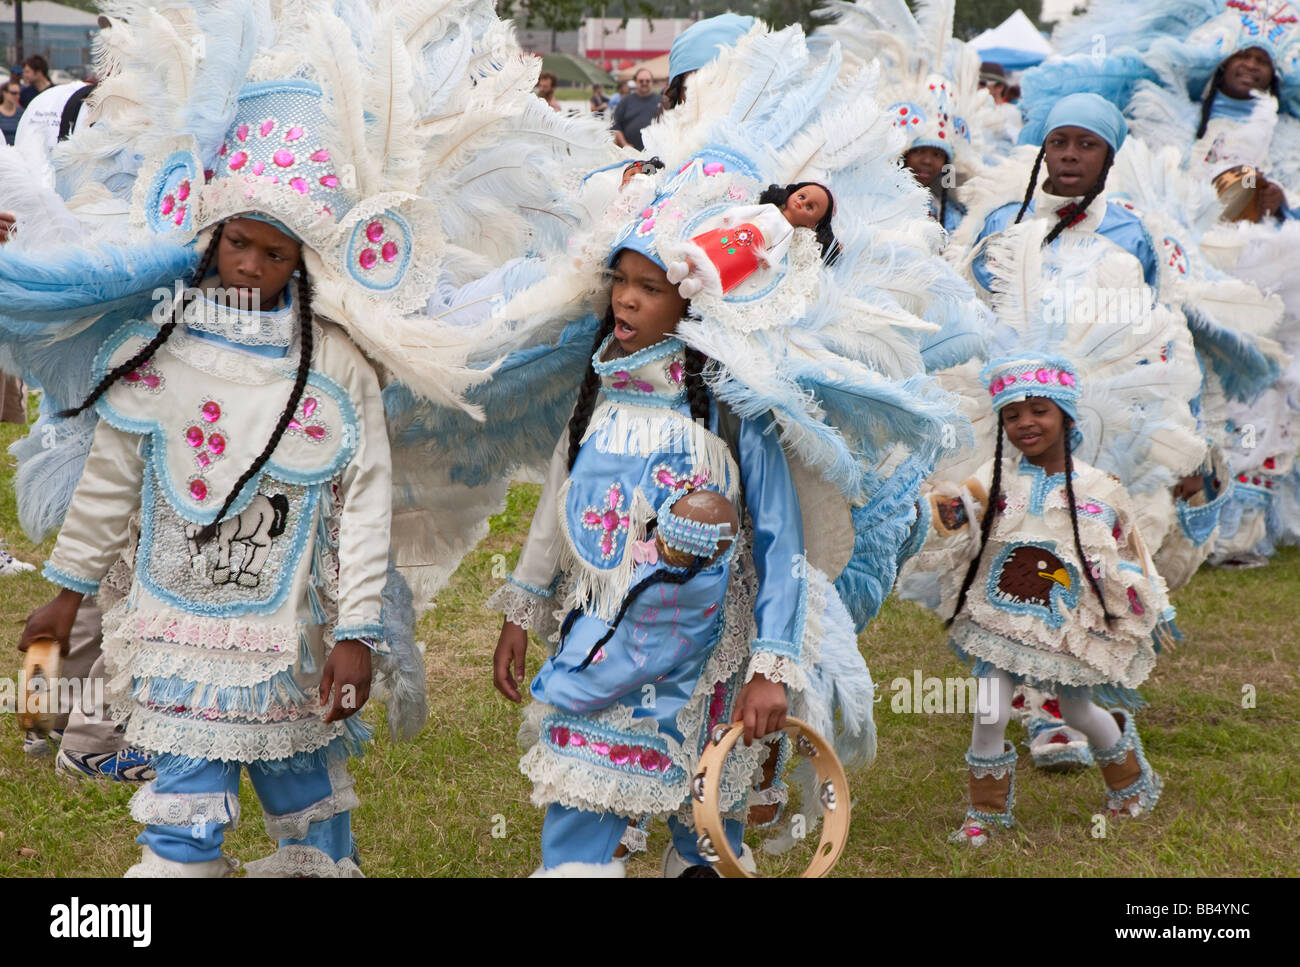 New Orleans Louisiana The Wild Mohicans Mardi Gras Indian Tribe performs at an Earth Day celebration Stock Photo